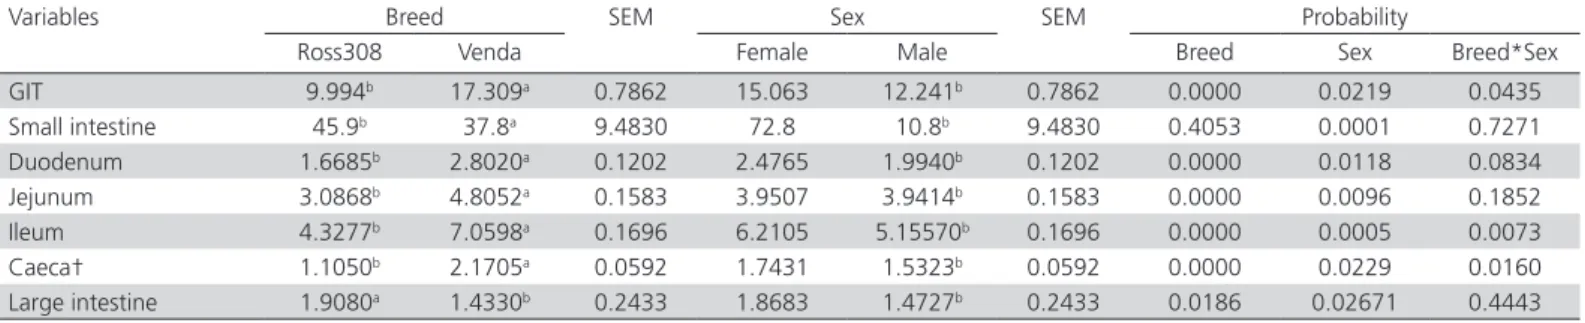 Table 6 – Relative organ length (cm organ/100g Carcass weight) of male and female Ross 308 broiler and Venda chickens  aged 90 days